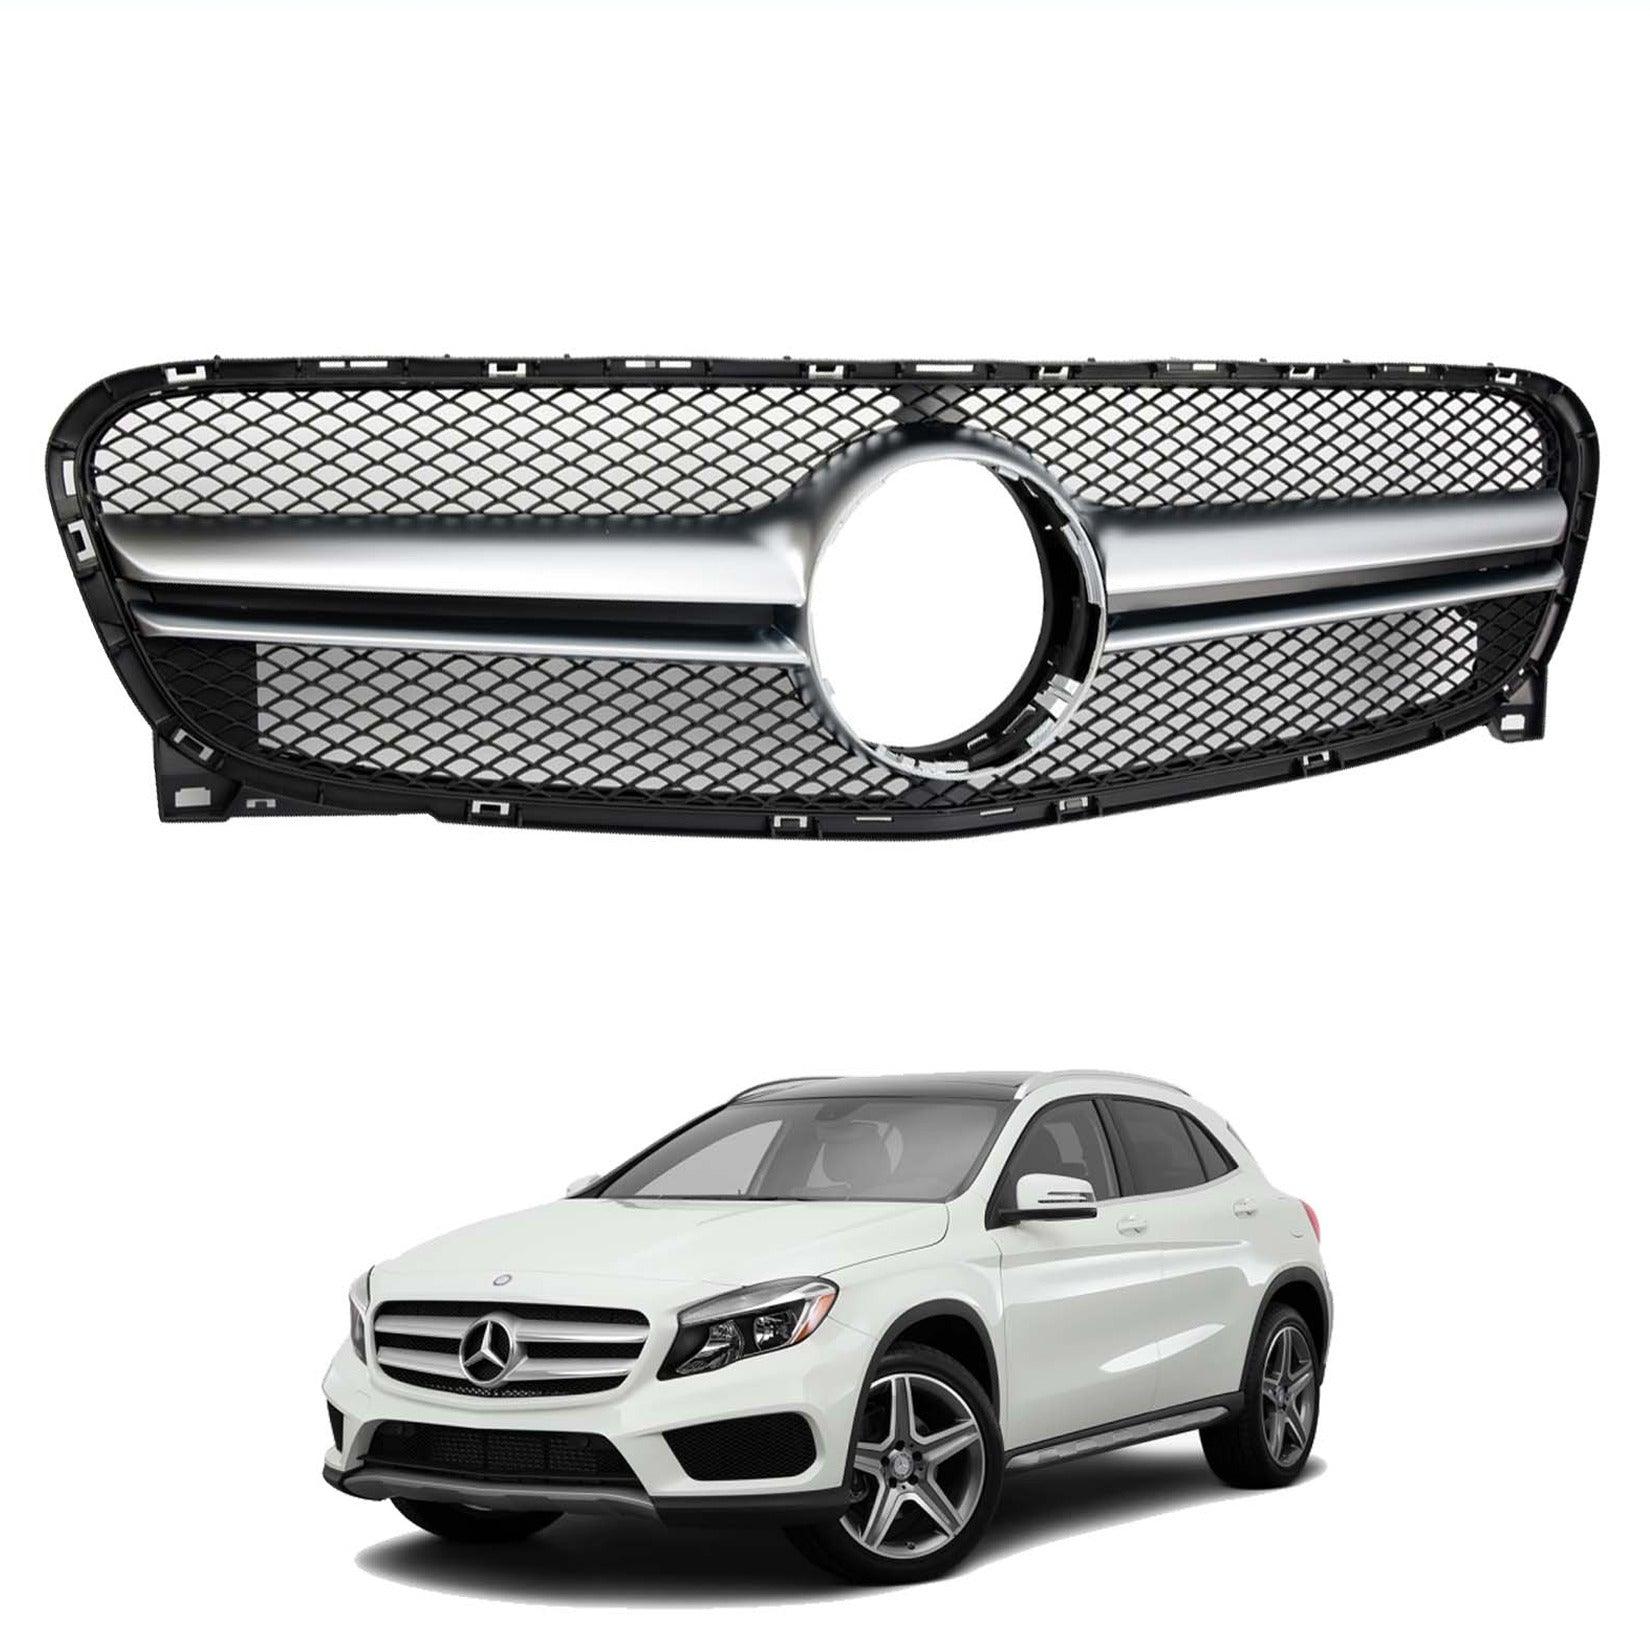 MERCEDES GLA X156 2014 - 2016 - AMG STYLE UPGRADE FRONT GRILLE - Storm Xccessories2